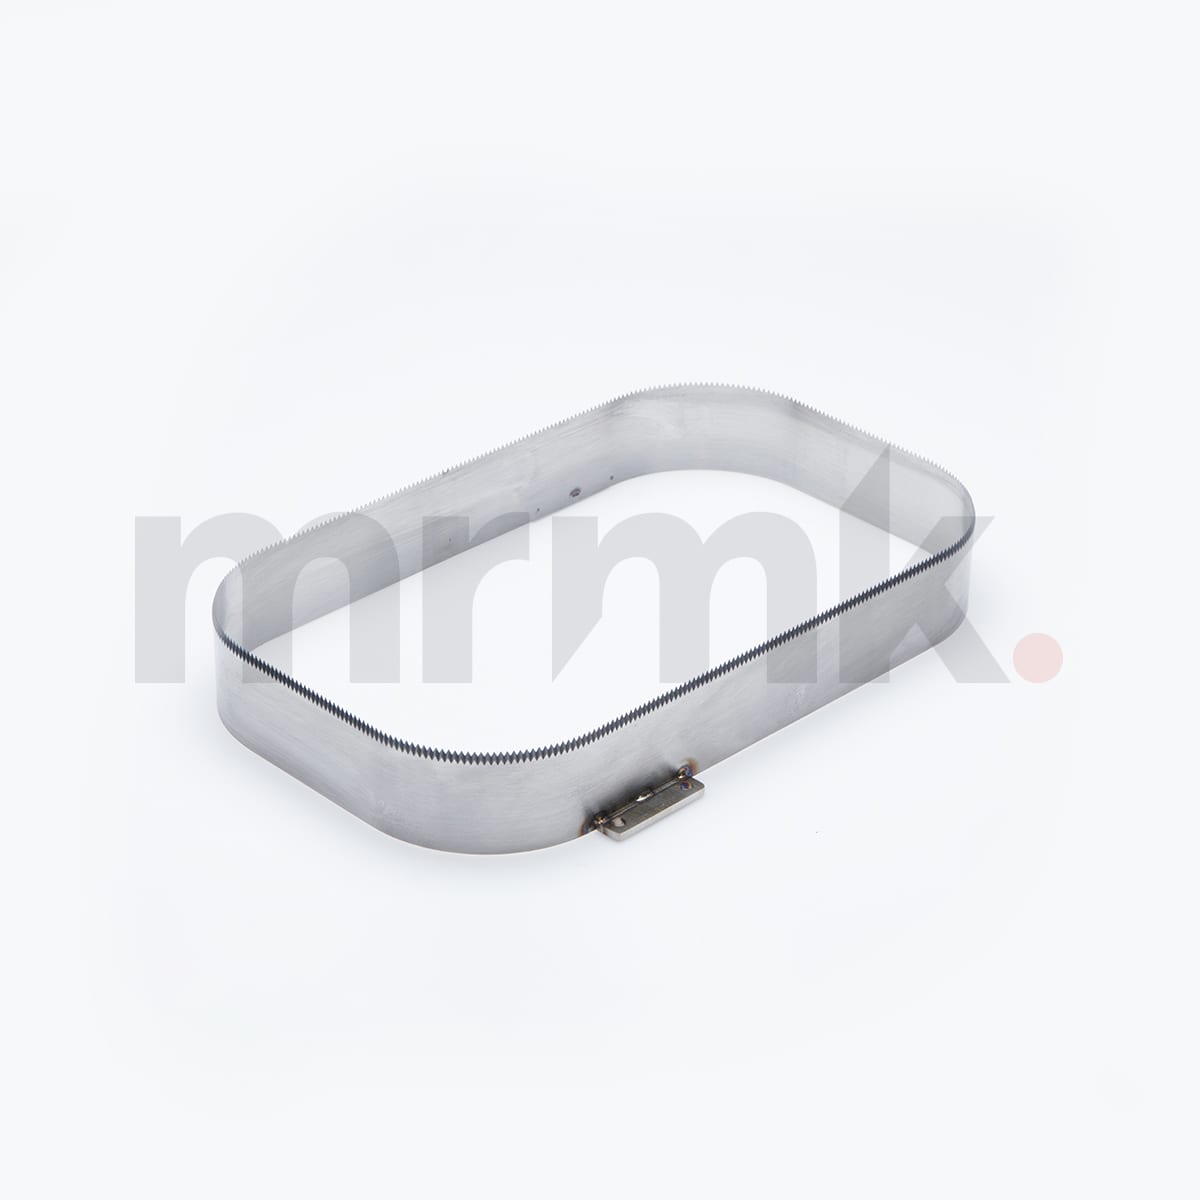 Reepack Compatible Tray Seal Knife